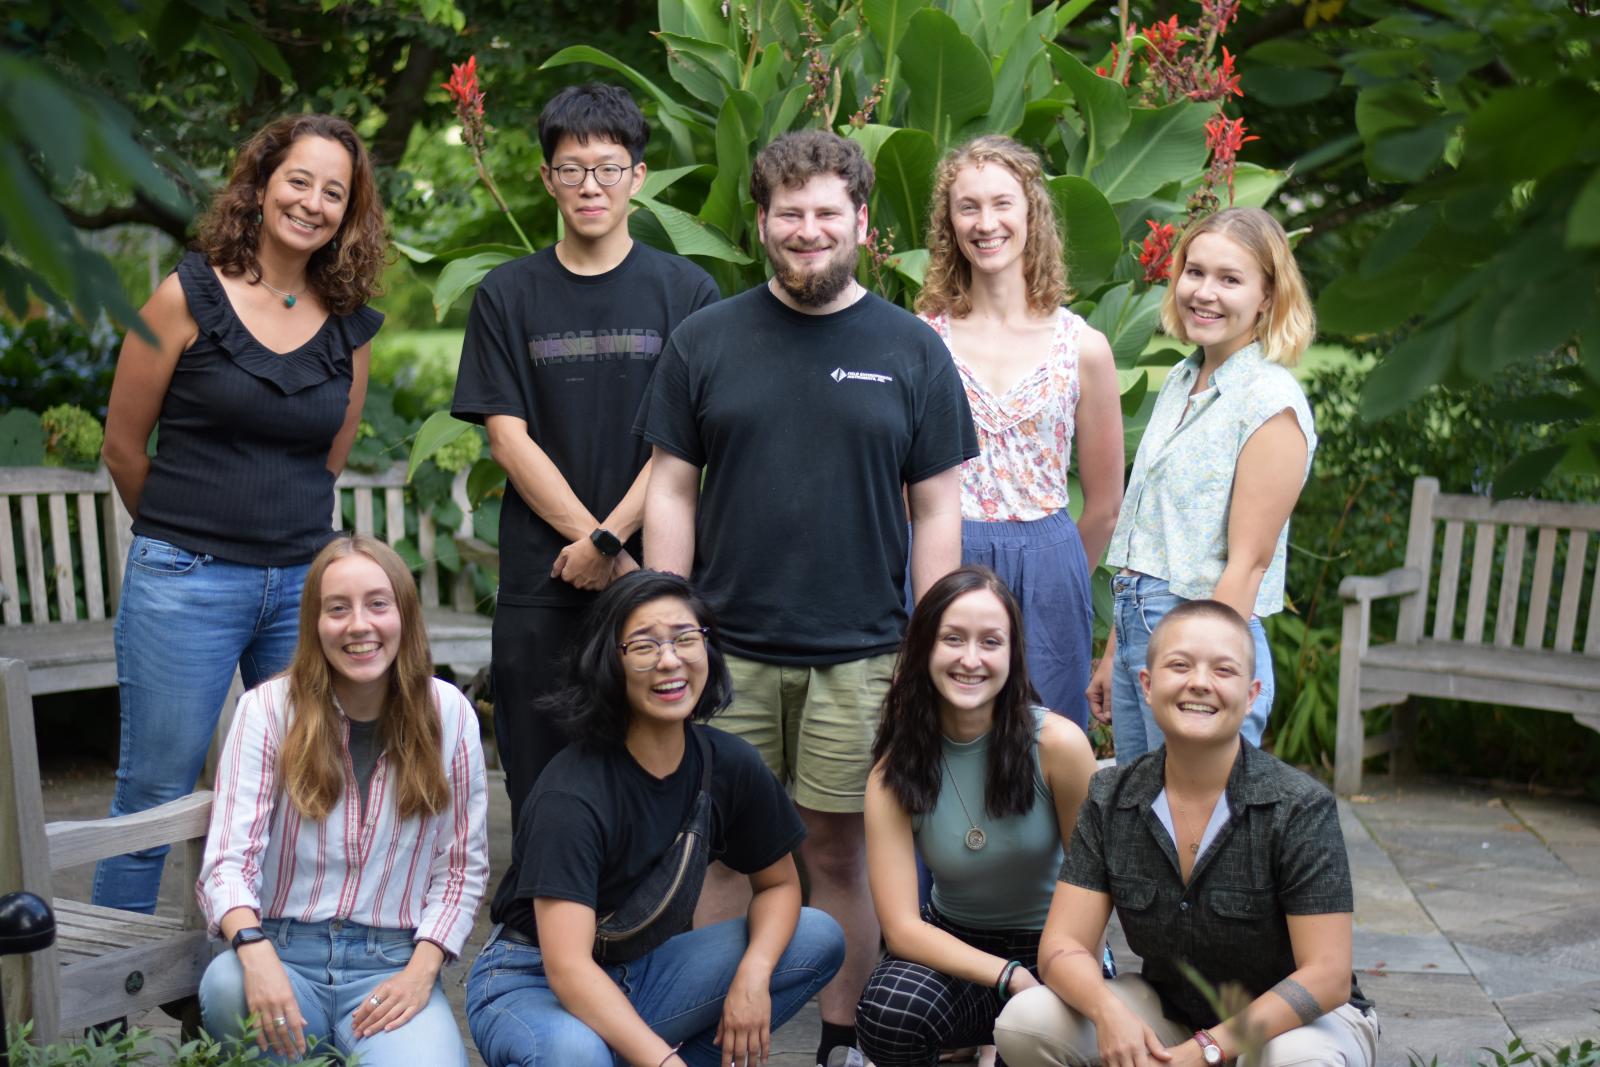 Graduate students pose in two rows in a garden